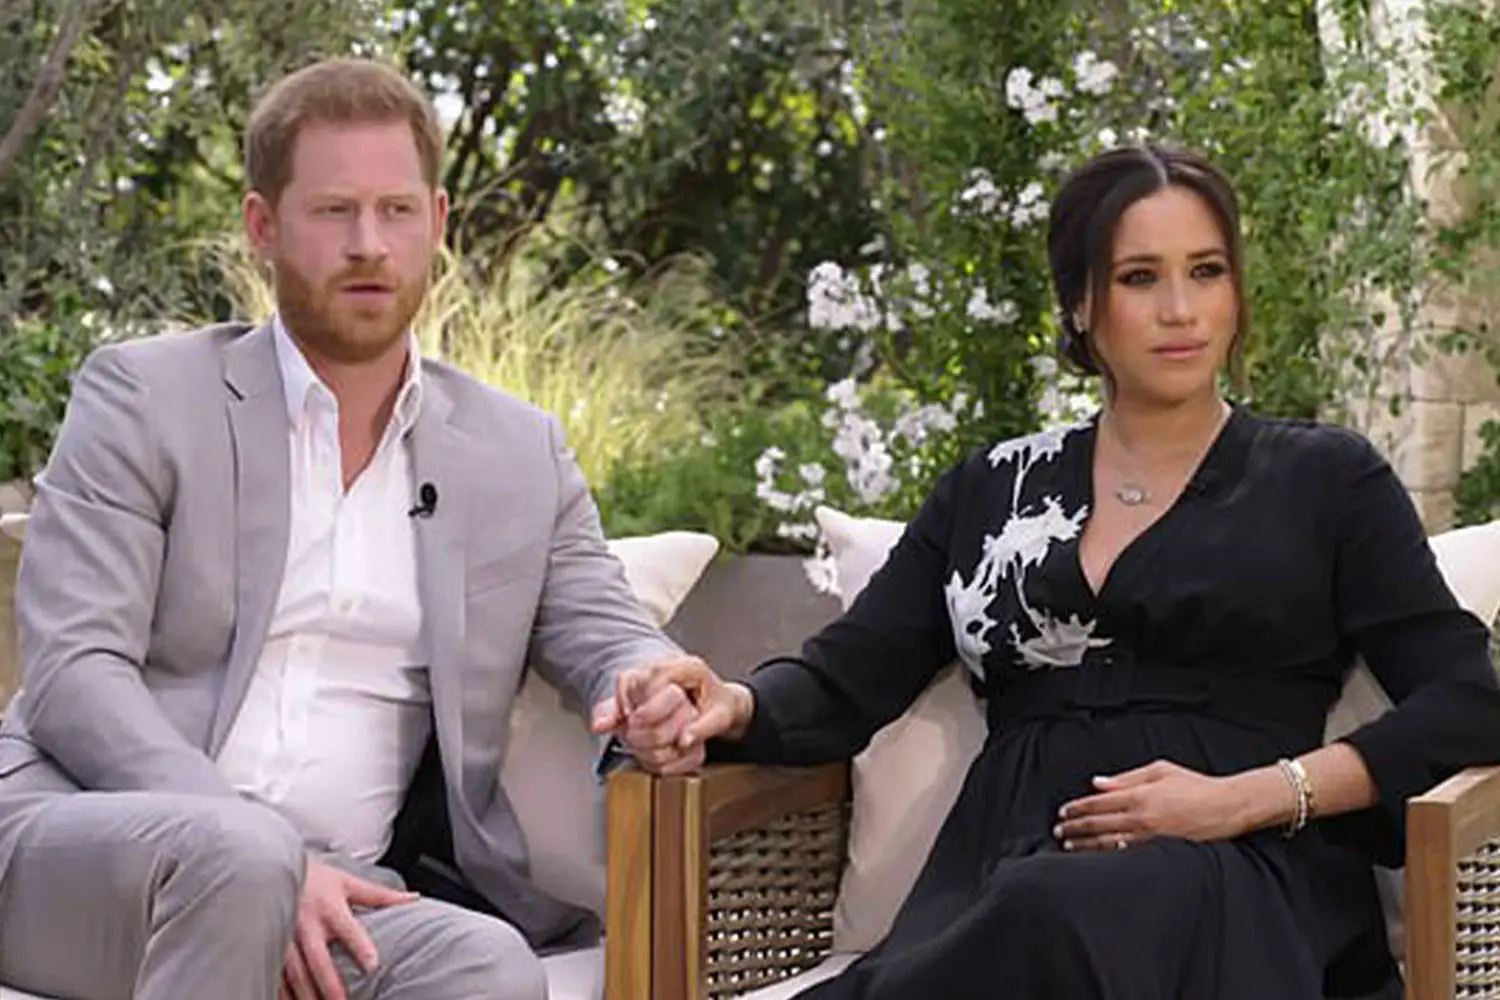 How to watch Meghan Markle and Prince Harry